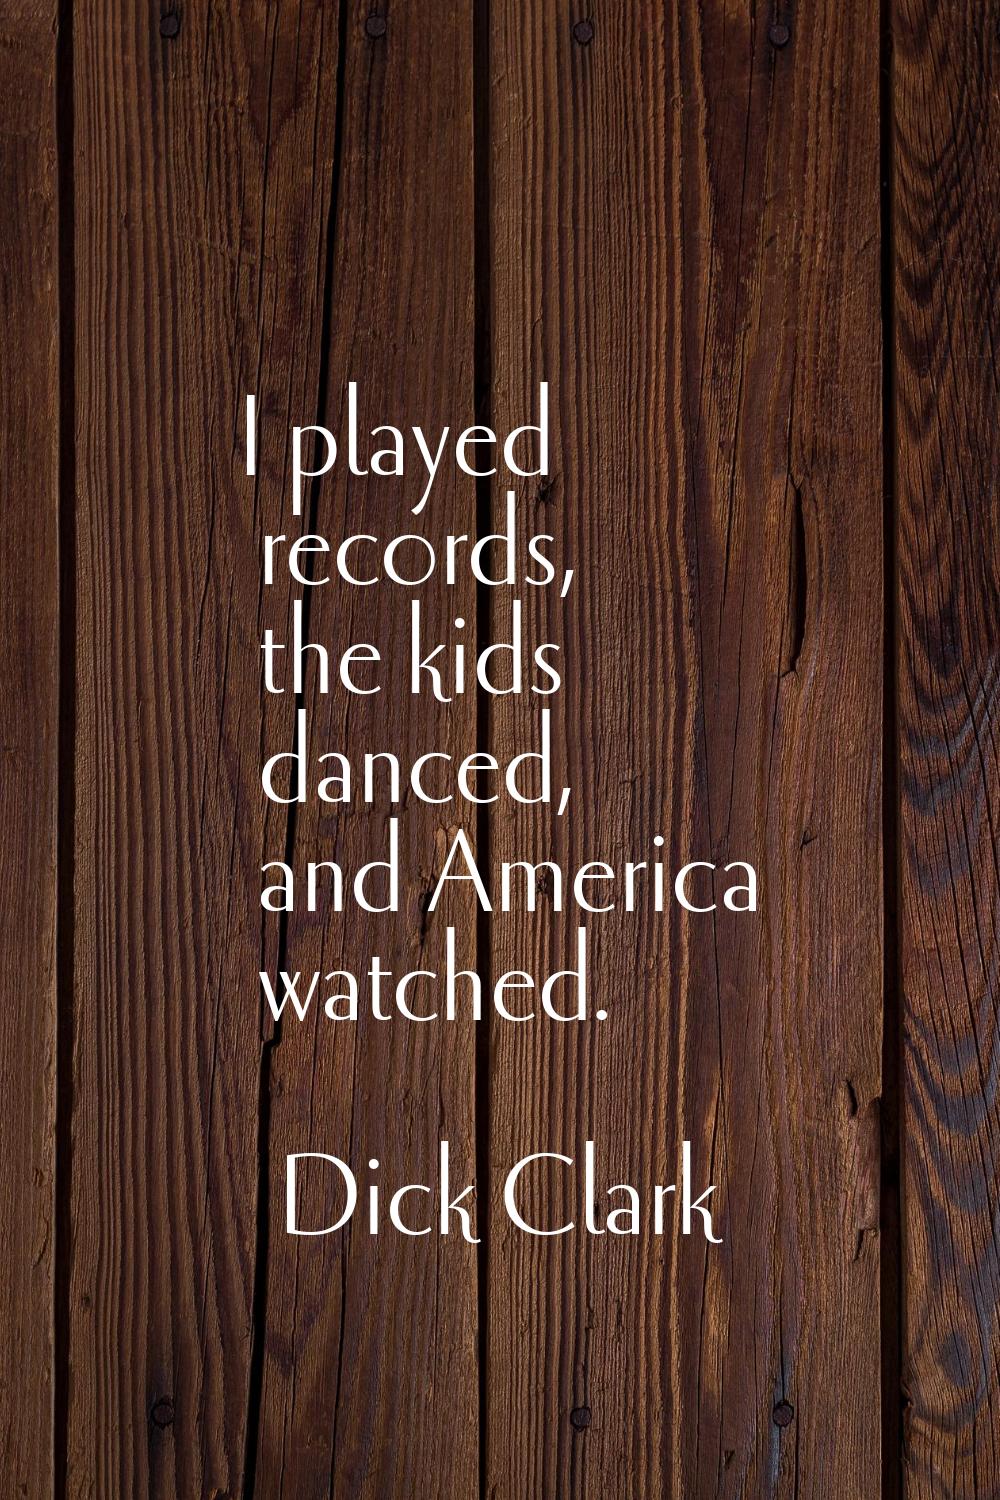 I played records, the kids danced, and America watched.